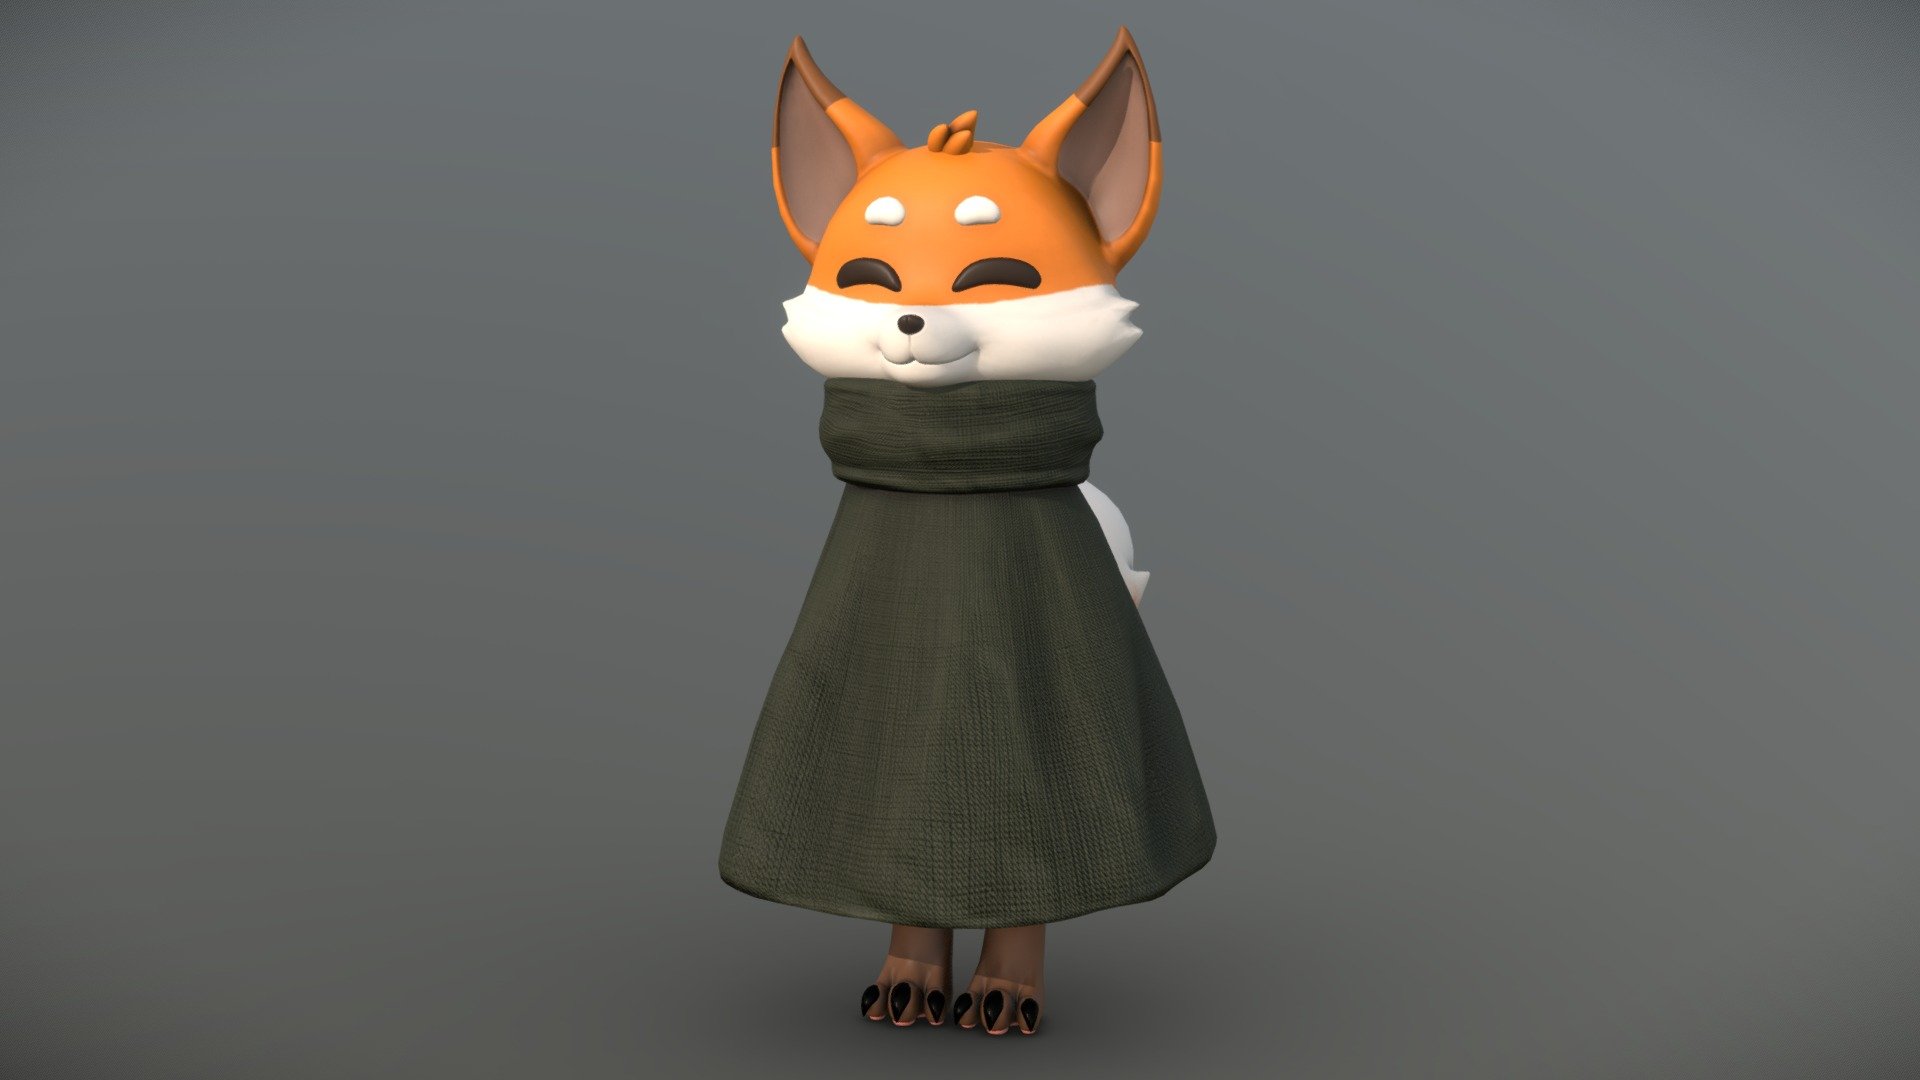 Fox in a Cape
Scrolling through sketchfab home and seing some fox model, wanted to make it with my own version, so there ya go

original 3d model by Fecalis - Fox in a cape - Download Free 3D model by bonfire.png 3d model